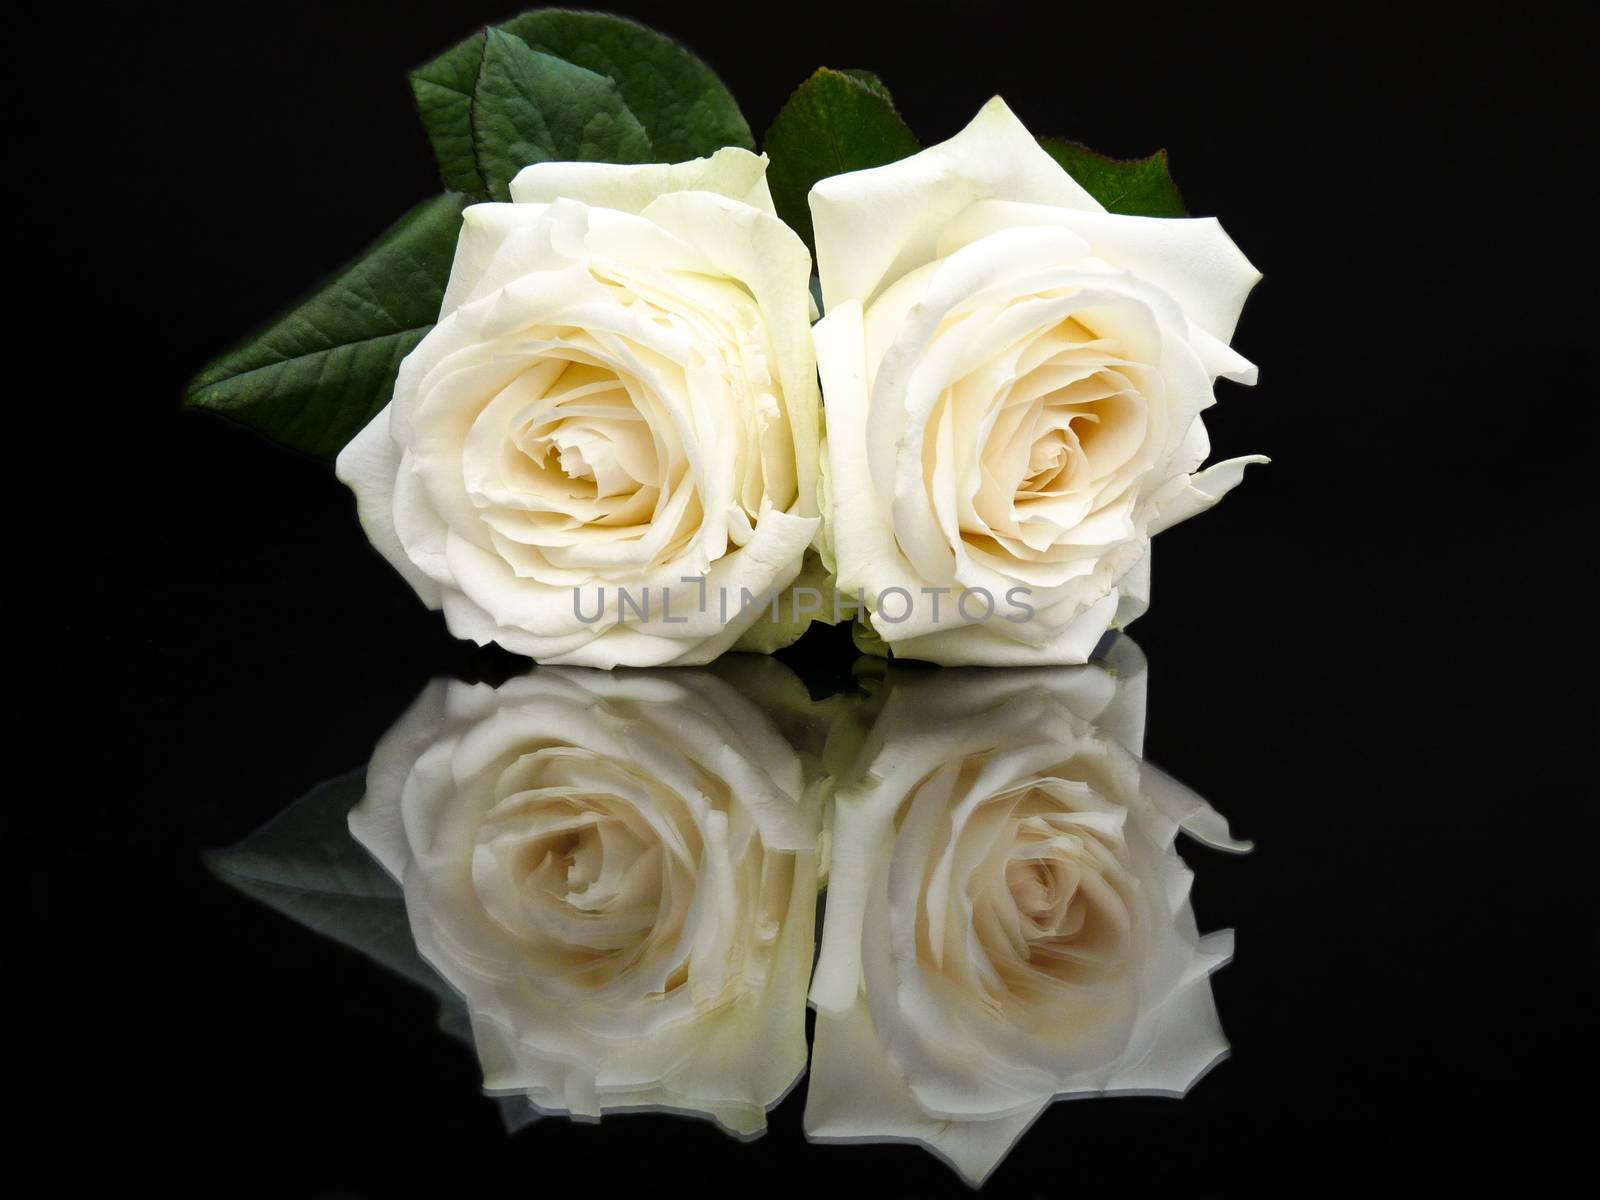 Two white roses with mirror image on black by BenSchonewille